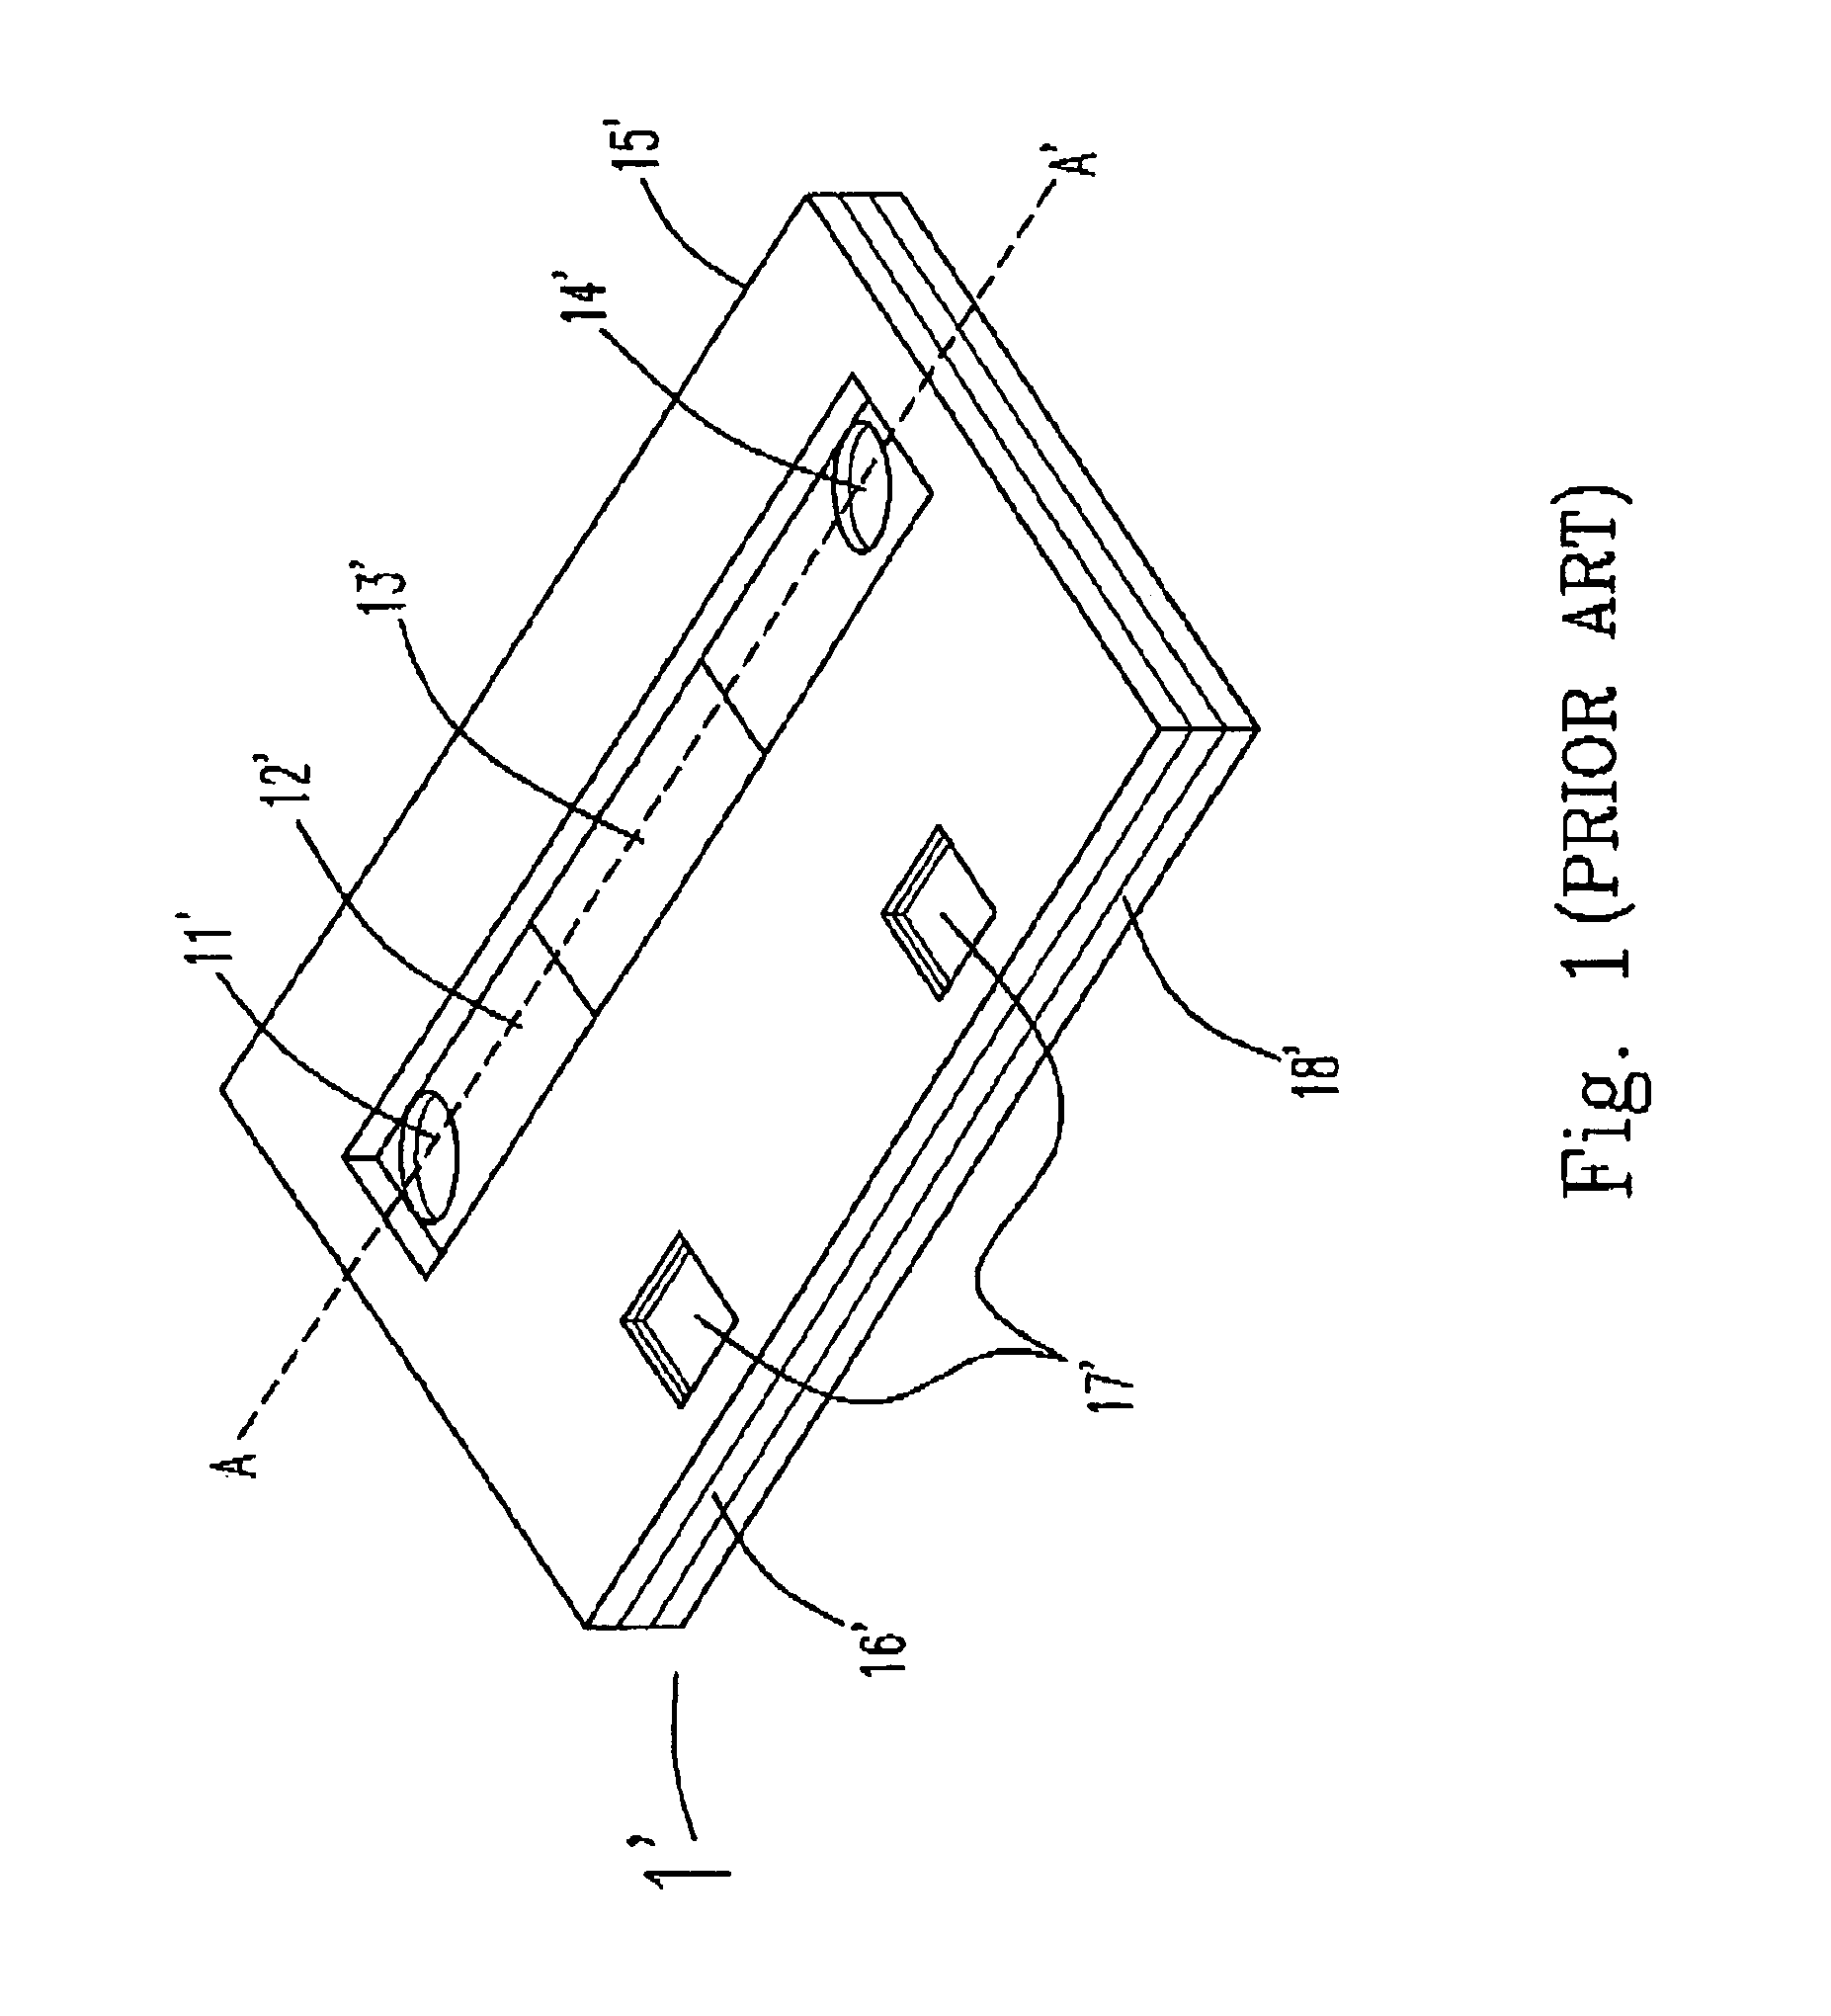 Electrowetting electrode device with electromagnetic field for actuation of magnetic-bead biochemical detection system